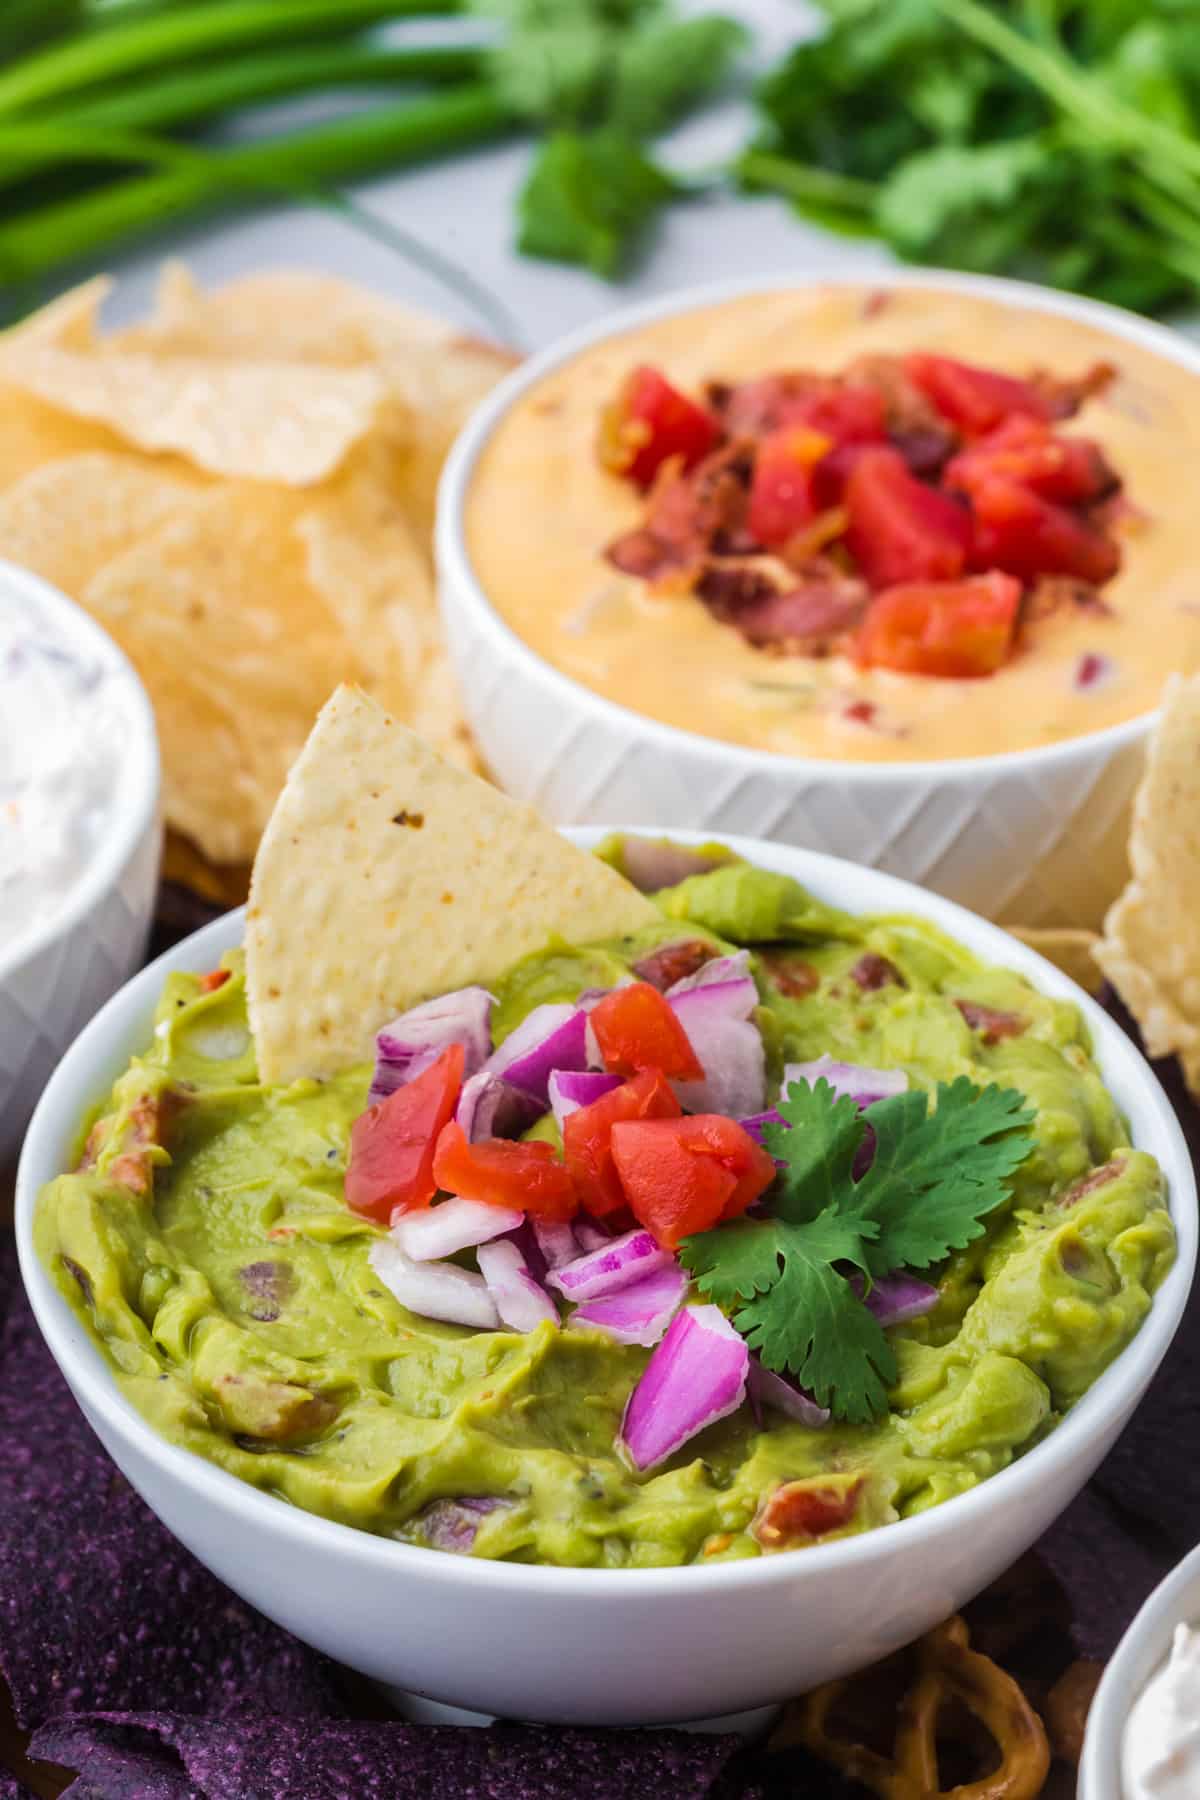 A bowl of avocado dip with a tortilla chip being dunked in.